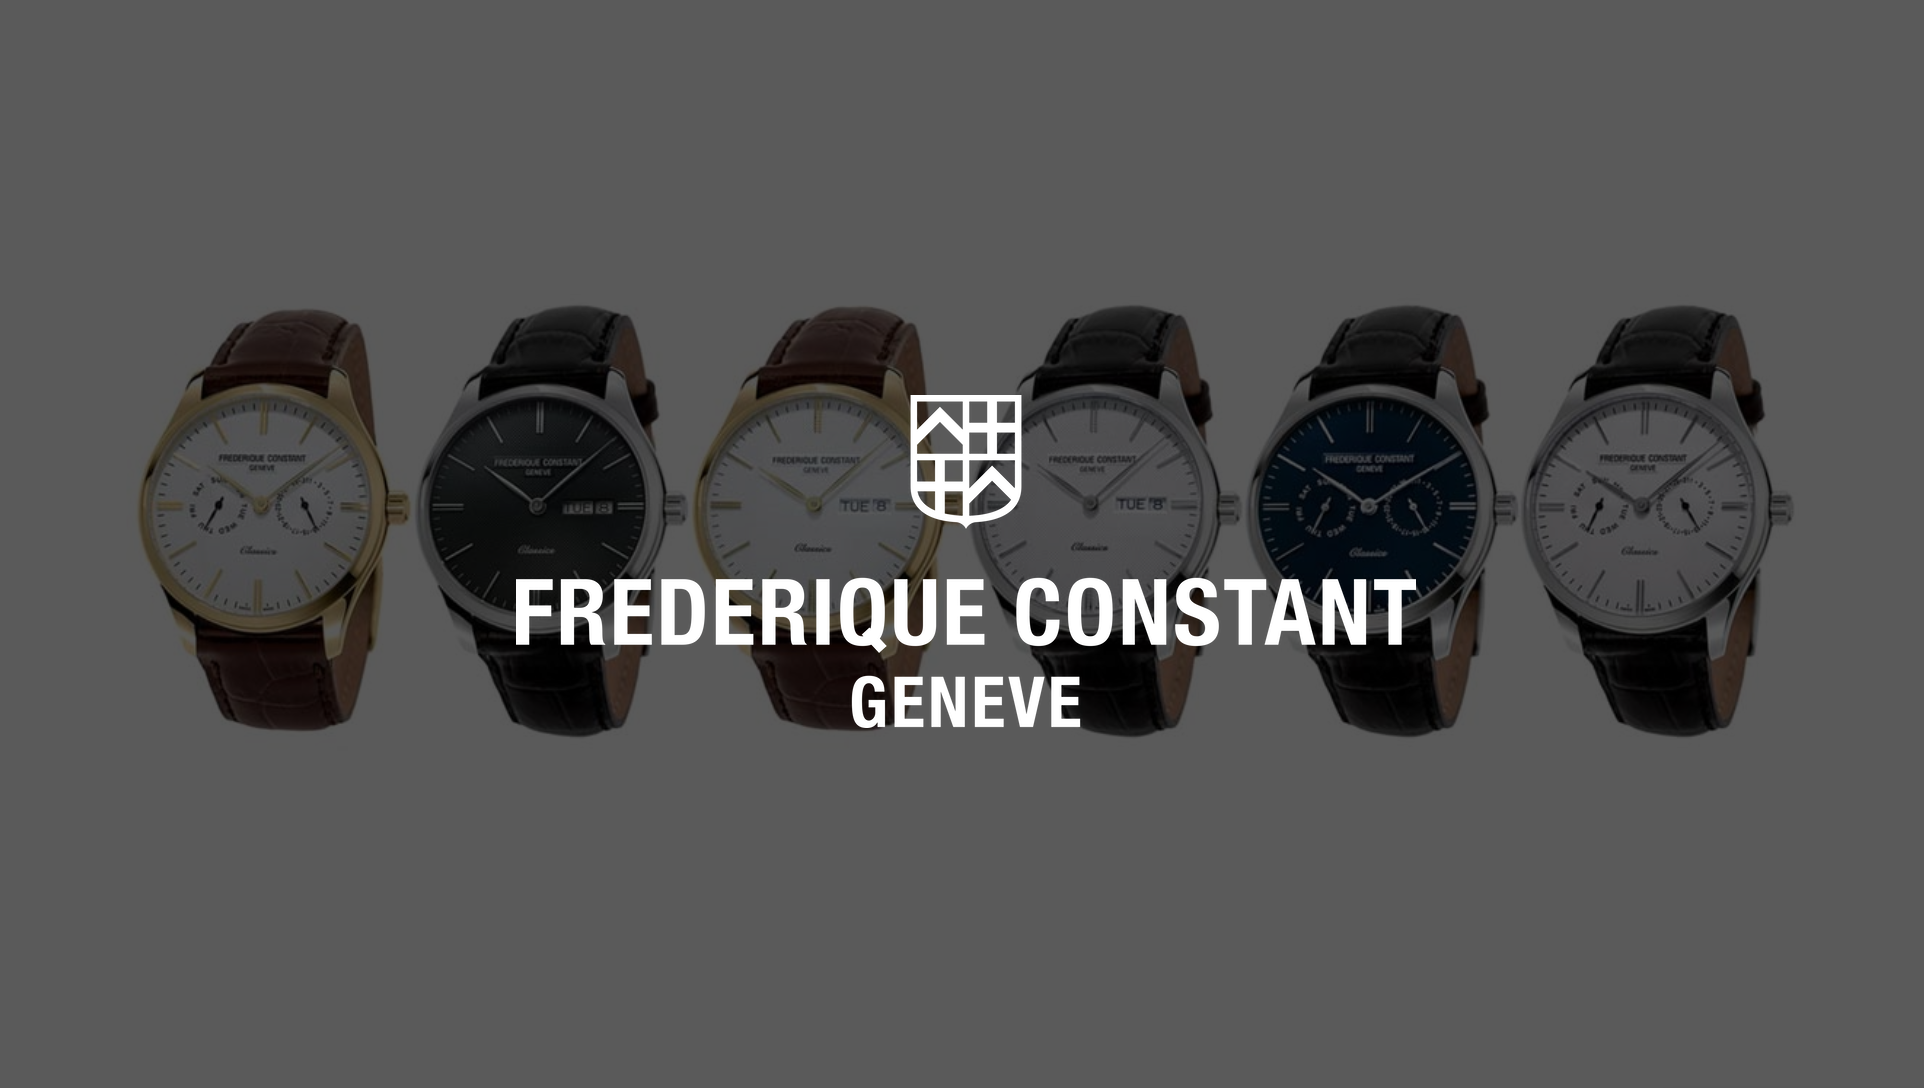 White Frederique Constant Geneve logo with mark on background showing six variations of watches